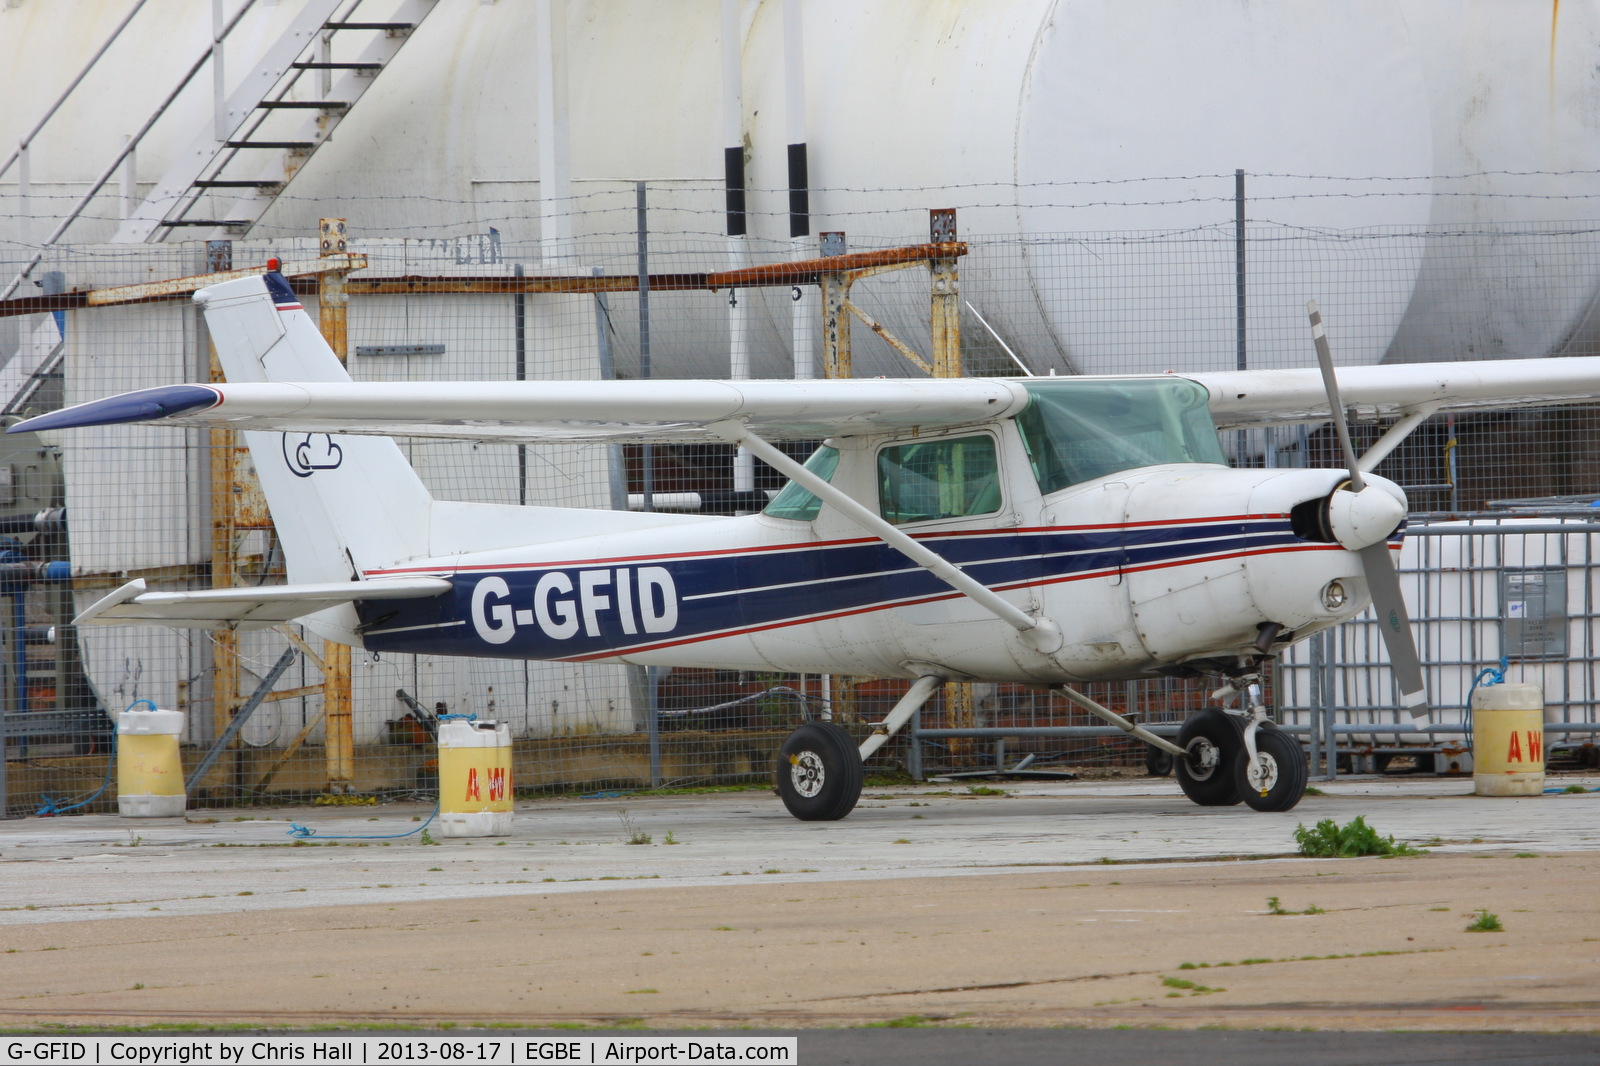 G-GFID, 1979 Cessna 152 C/N 152-82649, Pure Aviation Support Services Limited